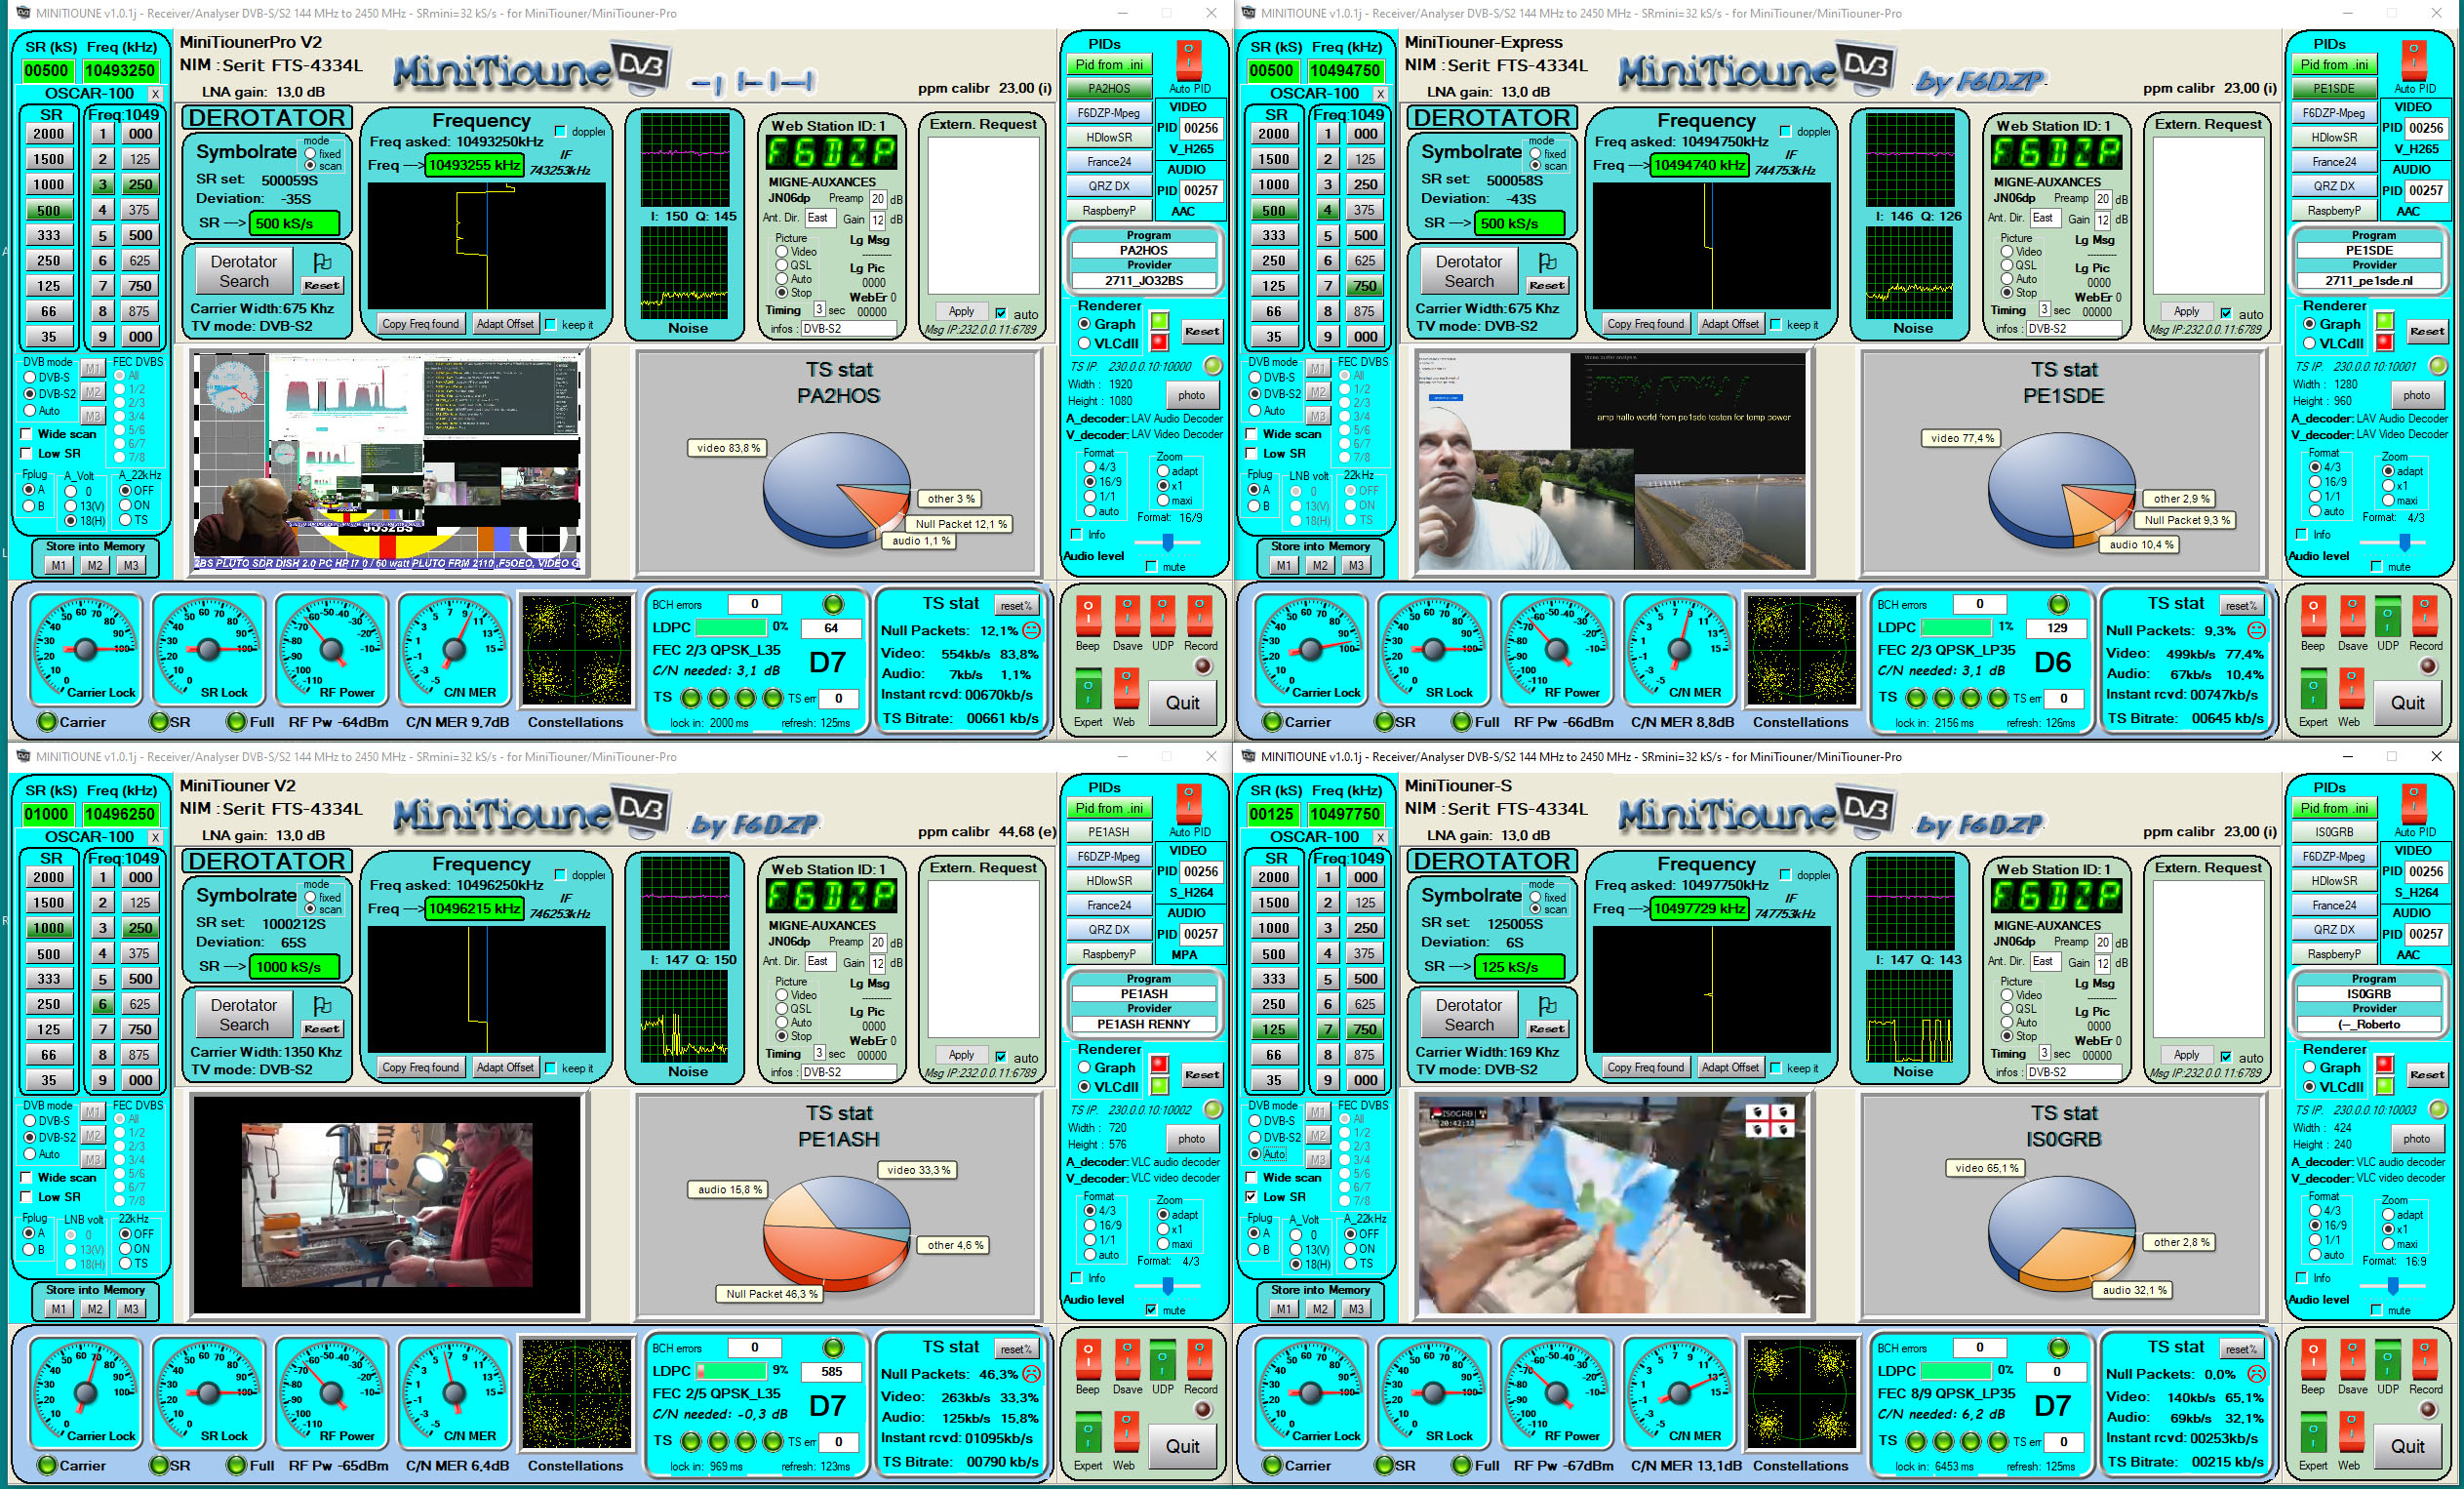 4xMinitioune_working at same time_RX4different stations.jpg